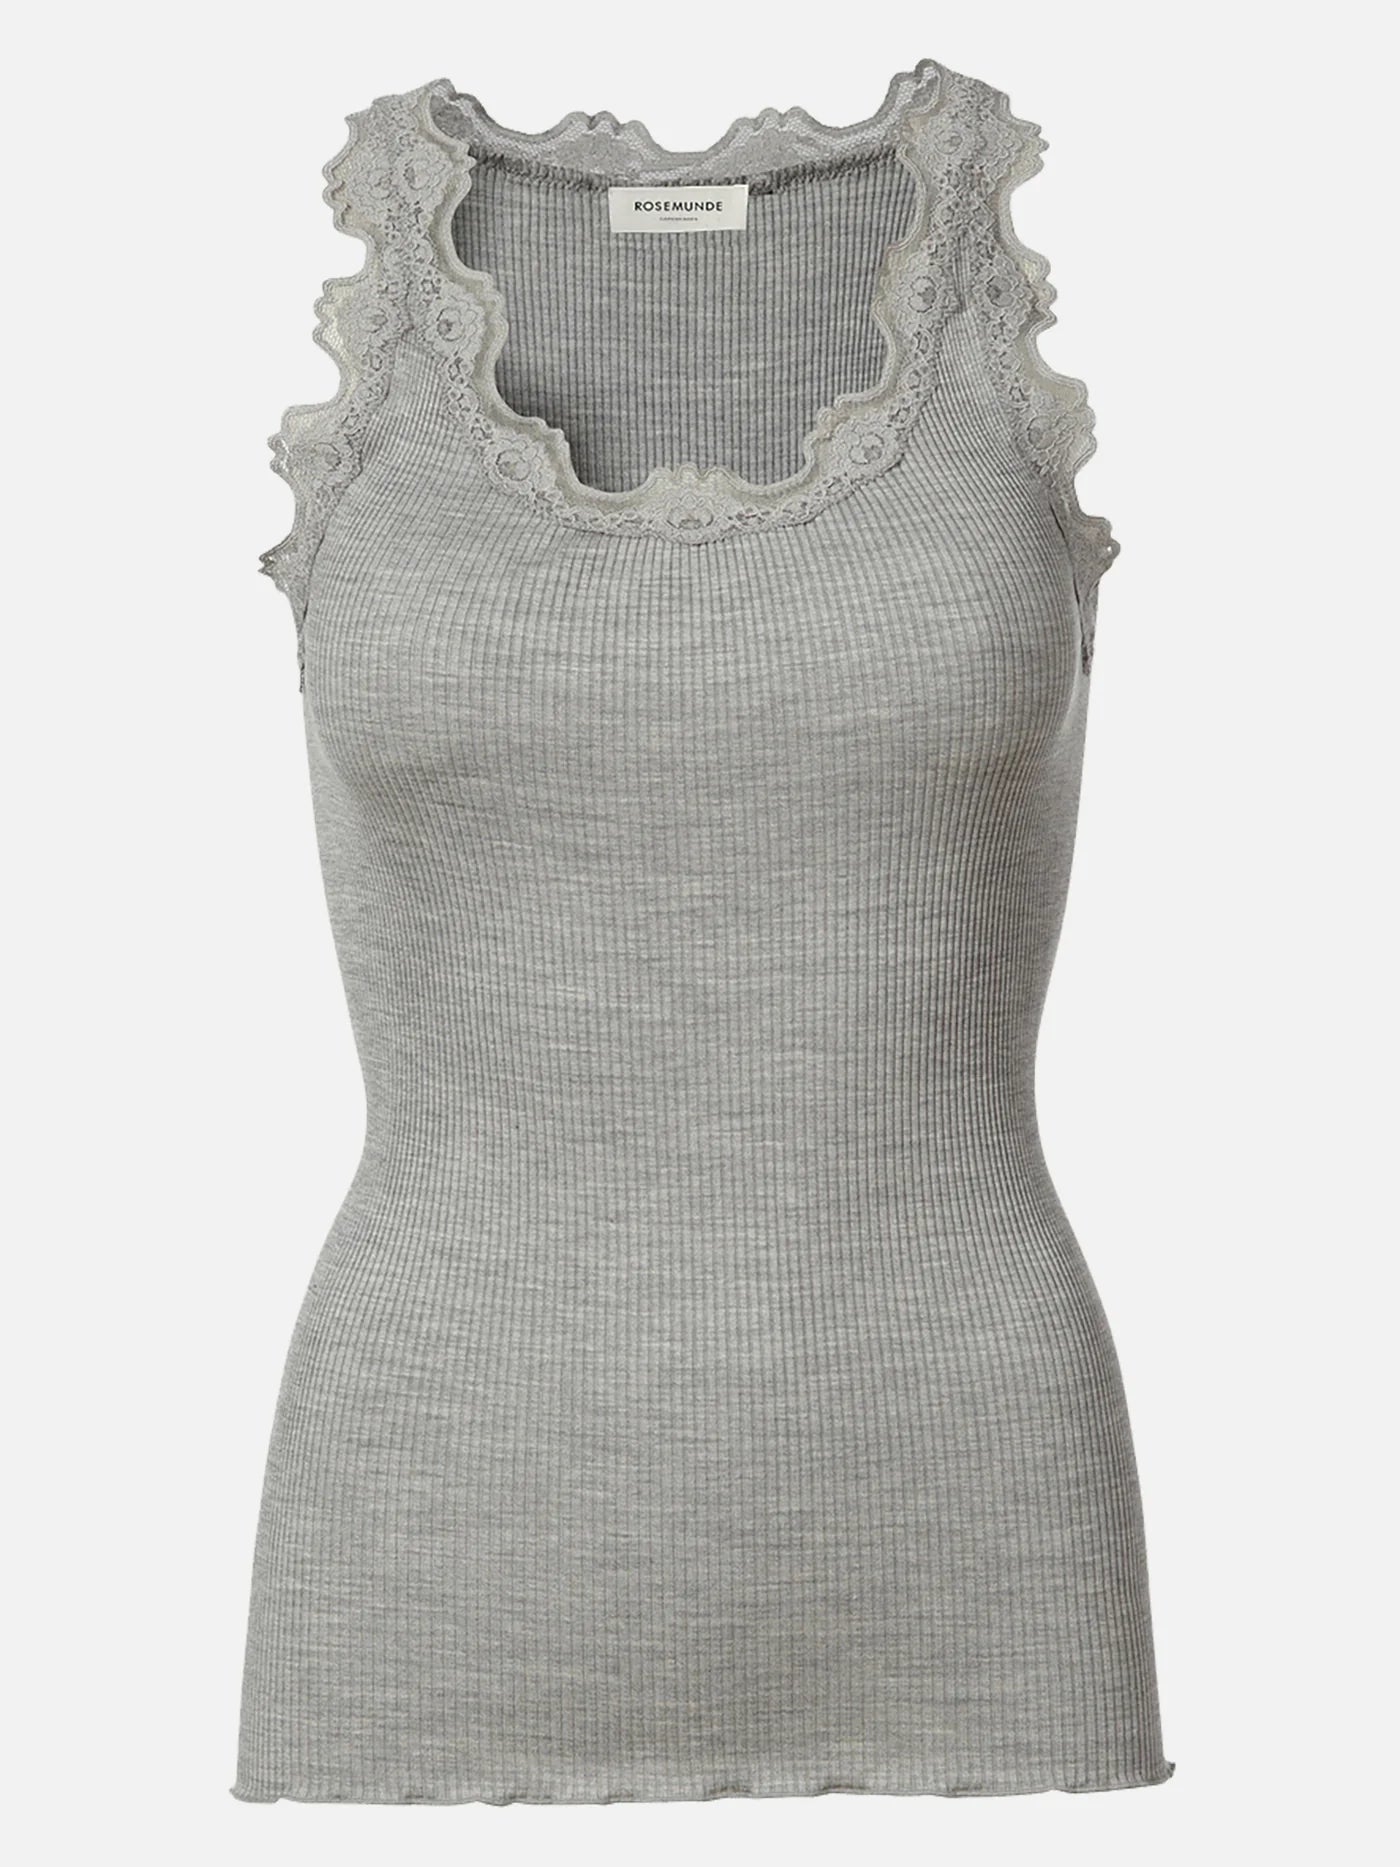 A Rosemunde Silk Lace Top elevates this grey tank top, making it a standout choice for lounge wear.